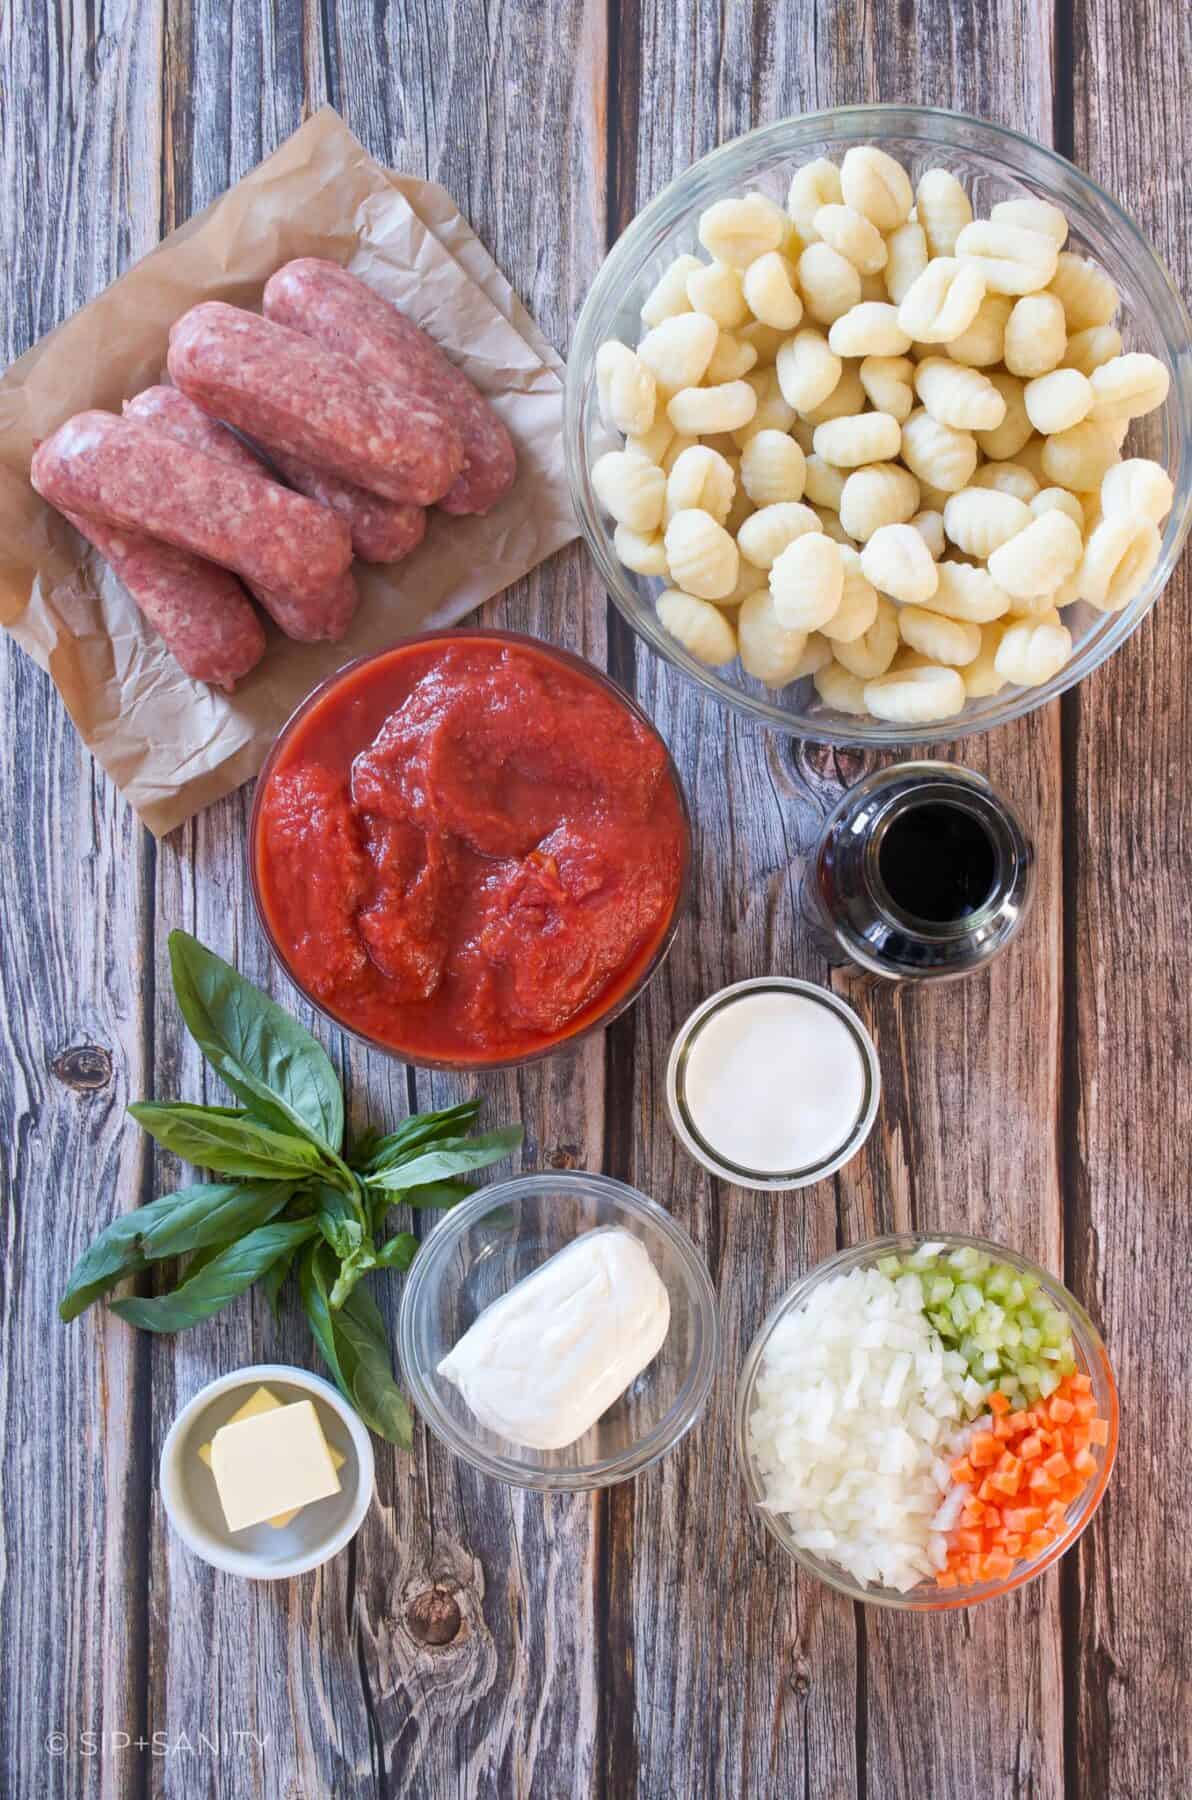 Raw ingredients for baked gnocchi and sausage ragu on a wooden table.